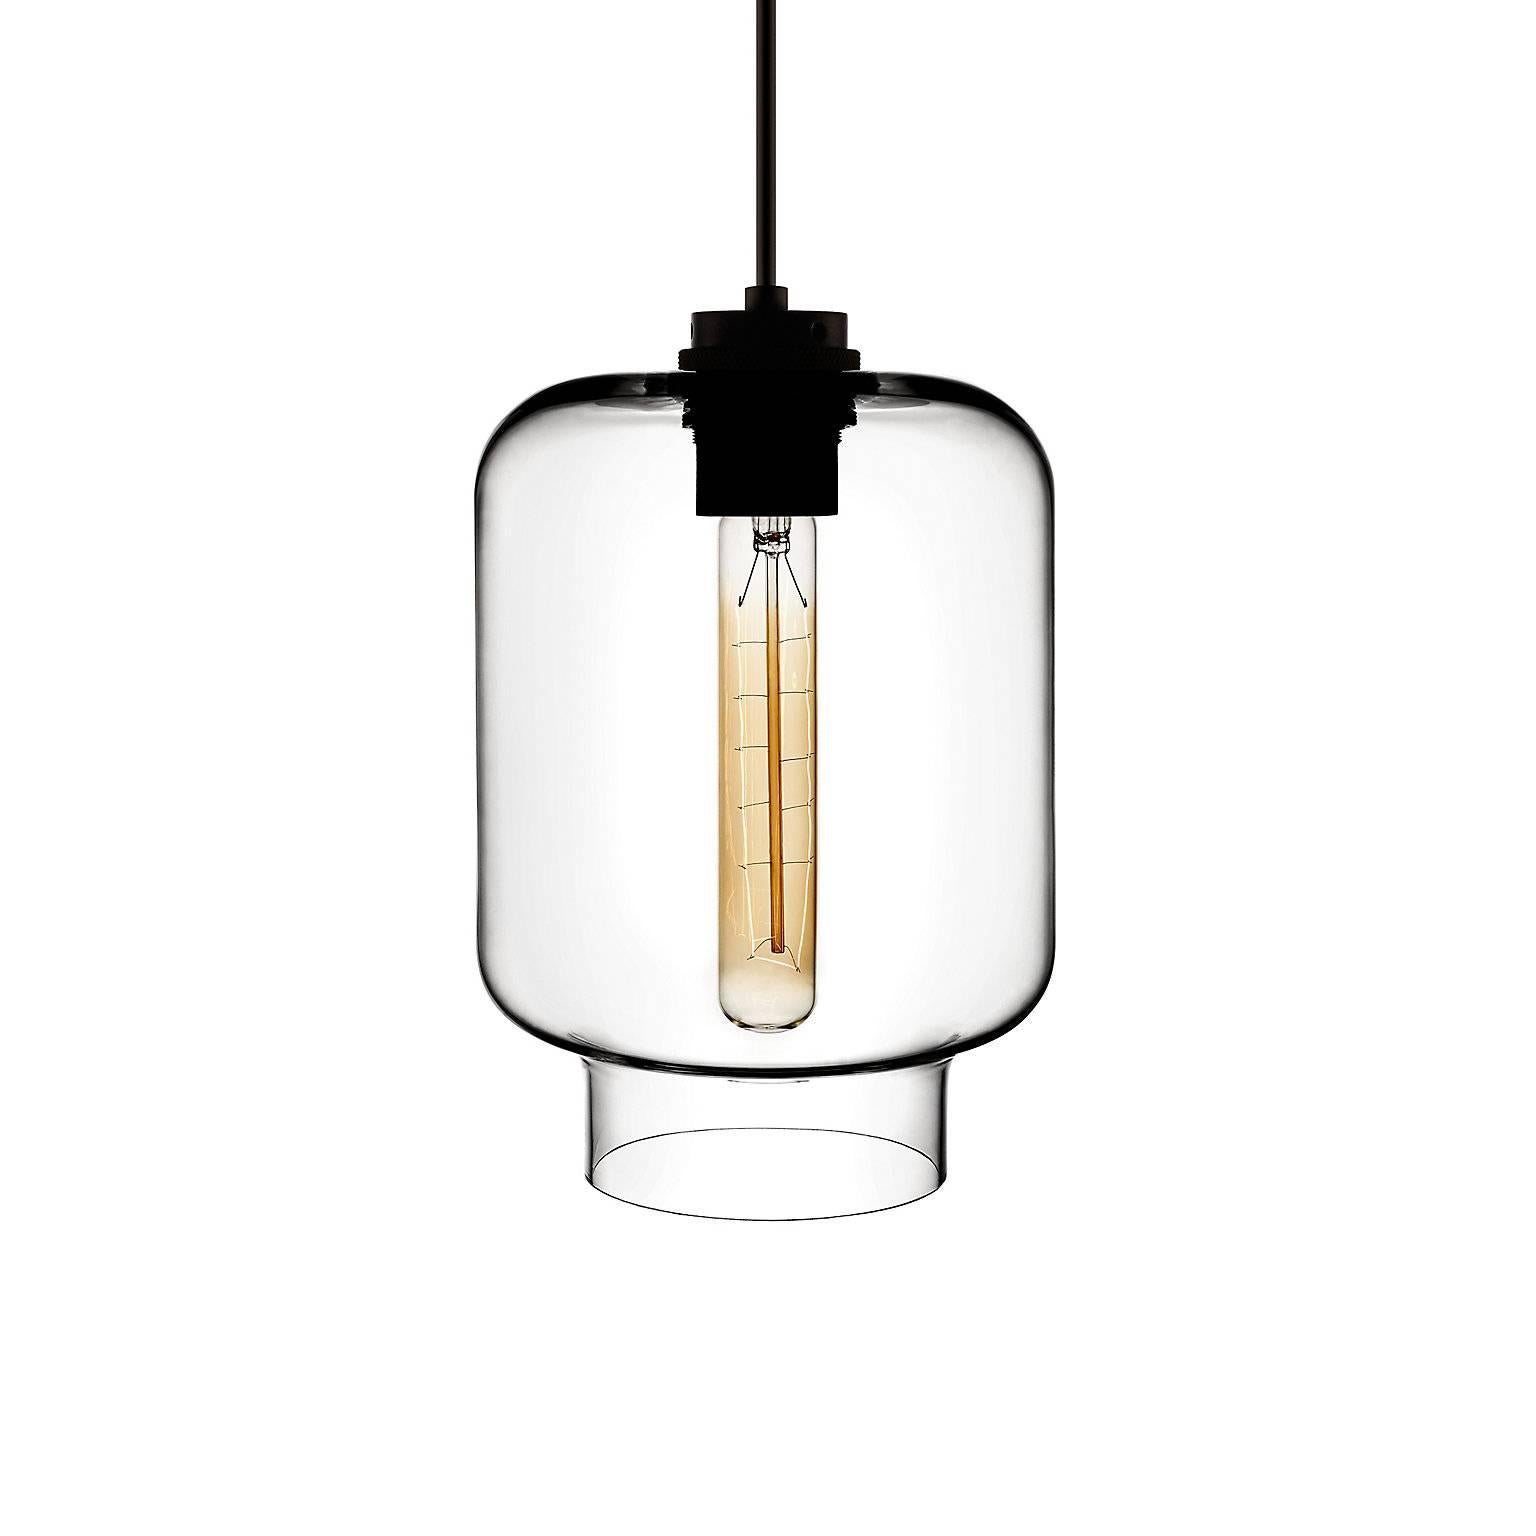 Unique to the Crystalline series, the Calla pendant adds a softness to the grouping with its delicate frame. Pairs easily with the Delinea, Axia, and Trove pendants that also comprise the Crystalline series. Every single glass pendant light that